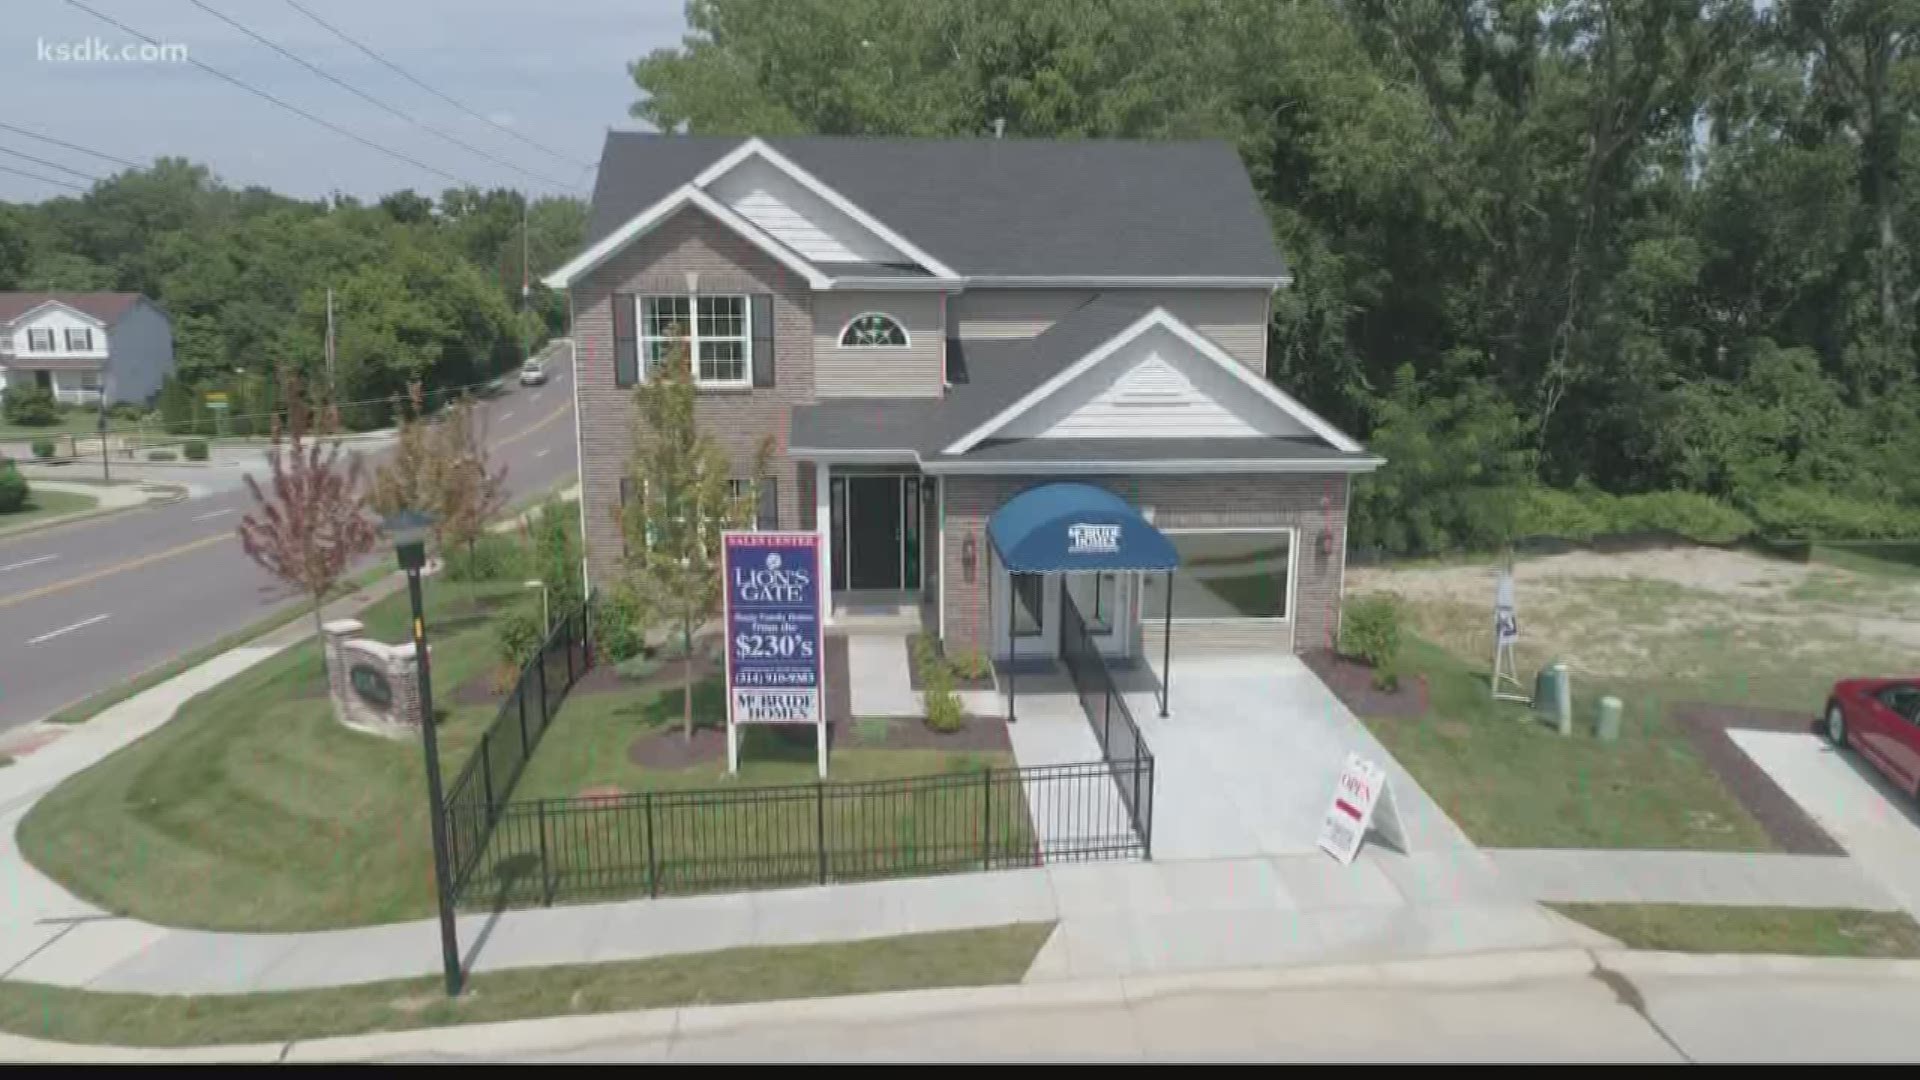 See why this McBride Homes Community is selling out fast!